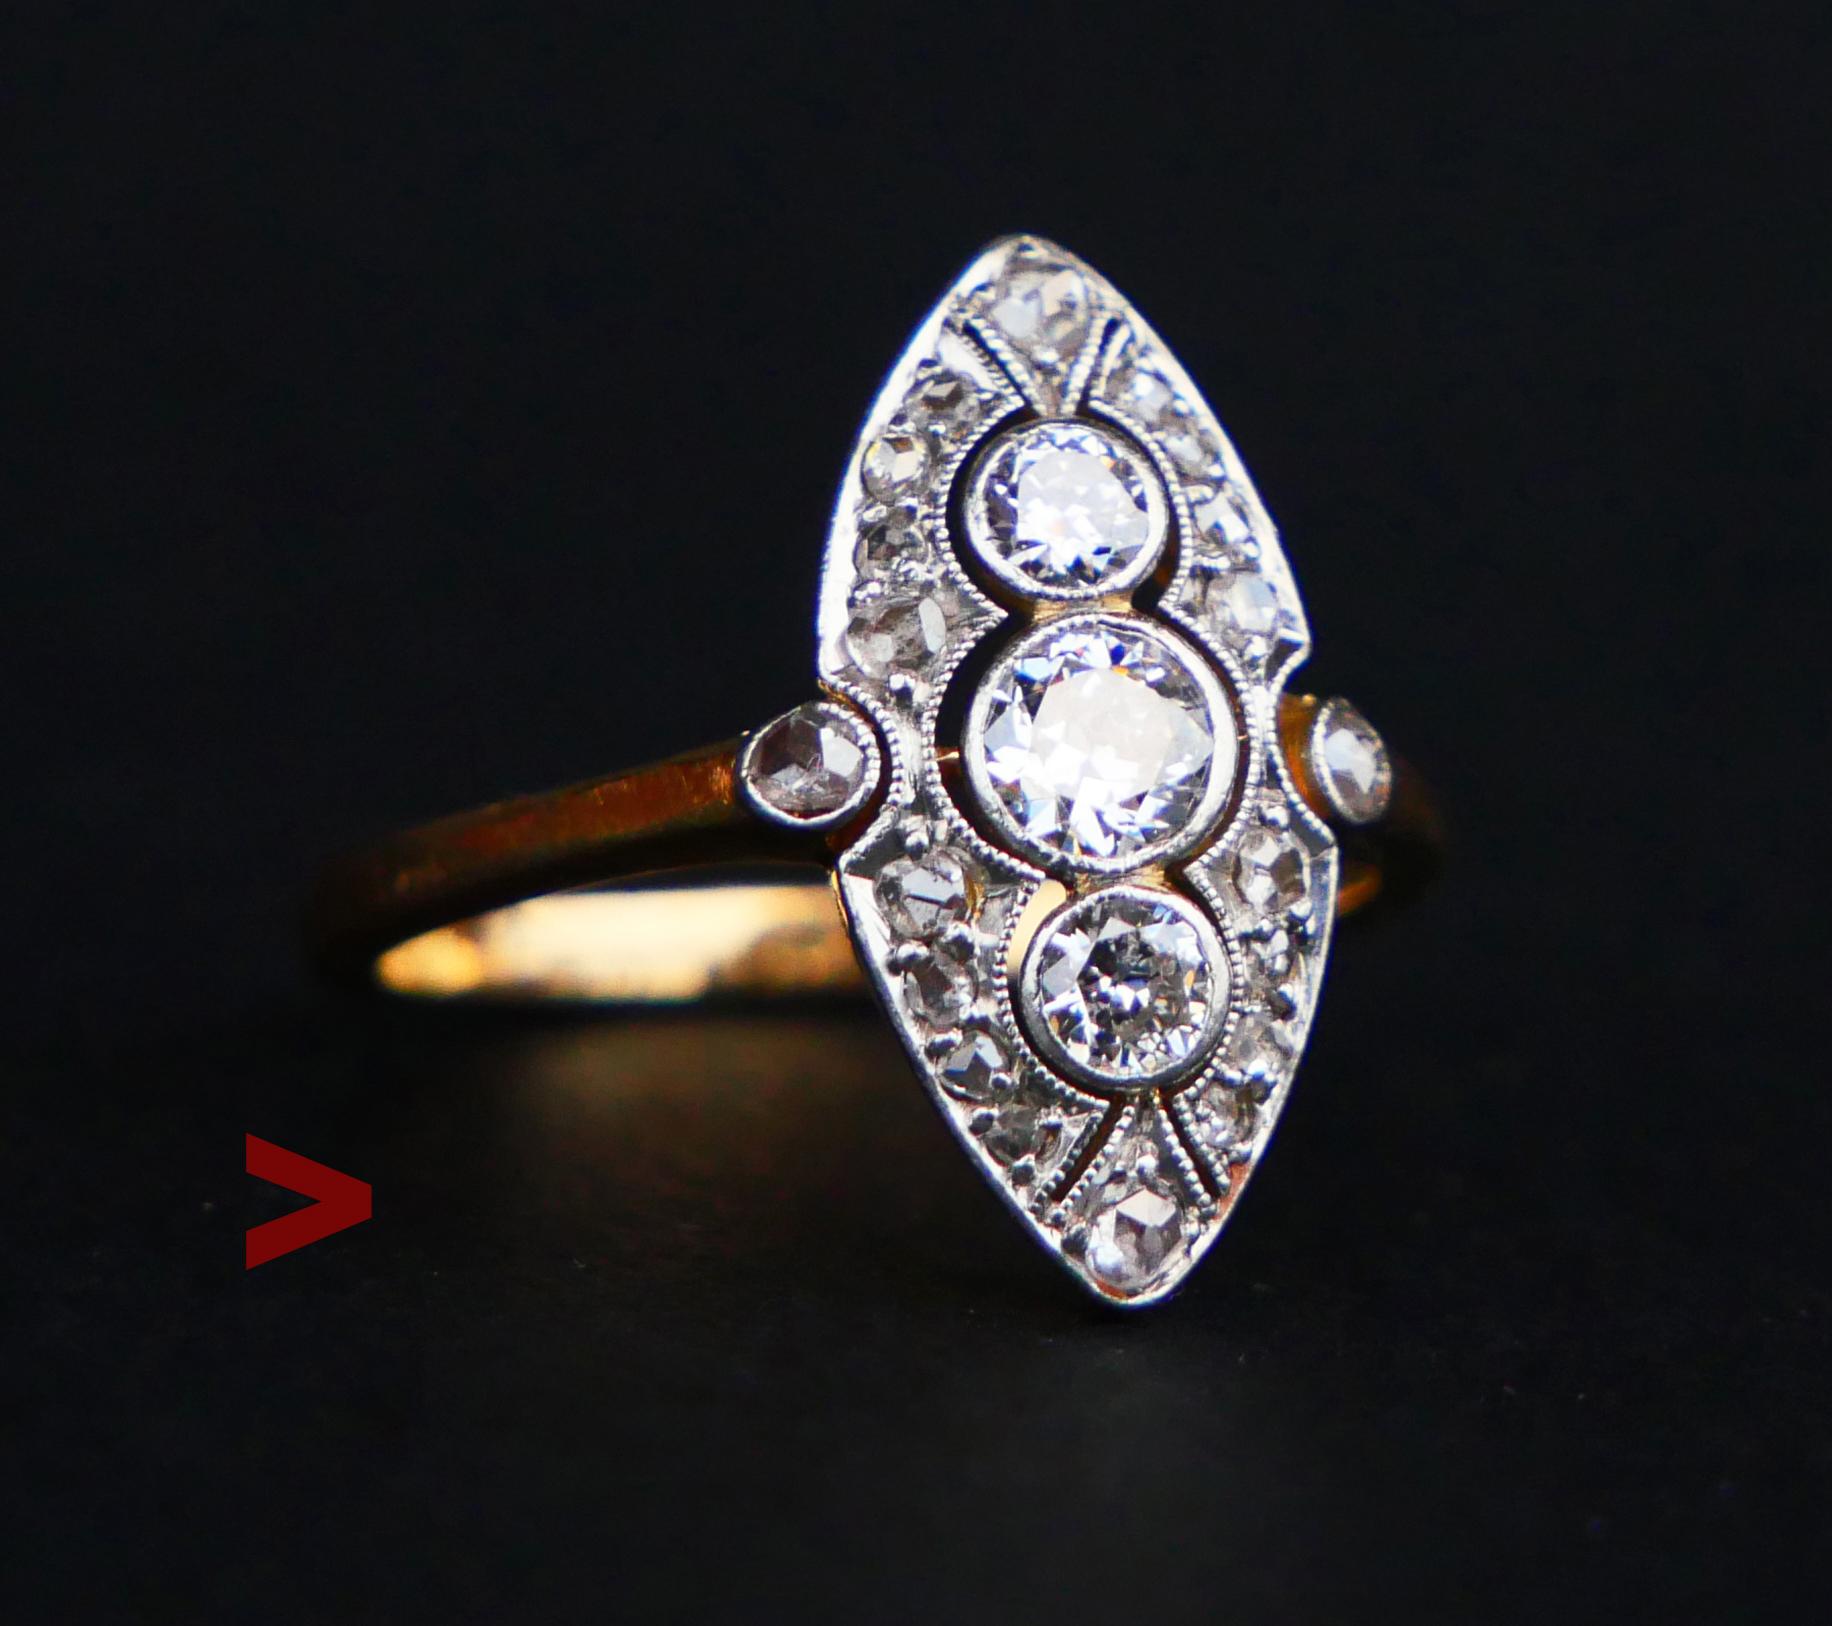 Old cluster ring, a fine example of design very popular in early 20th century period.Combination of Gold, Platinum, and Diamonds of different cuts.
Platinum on Gold openwork convex crown with 23 diamond stones. Band tested solid 18K Yellow Gold,